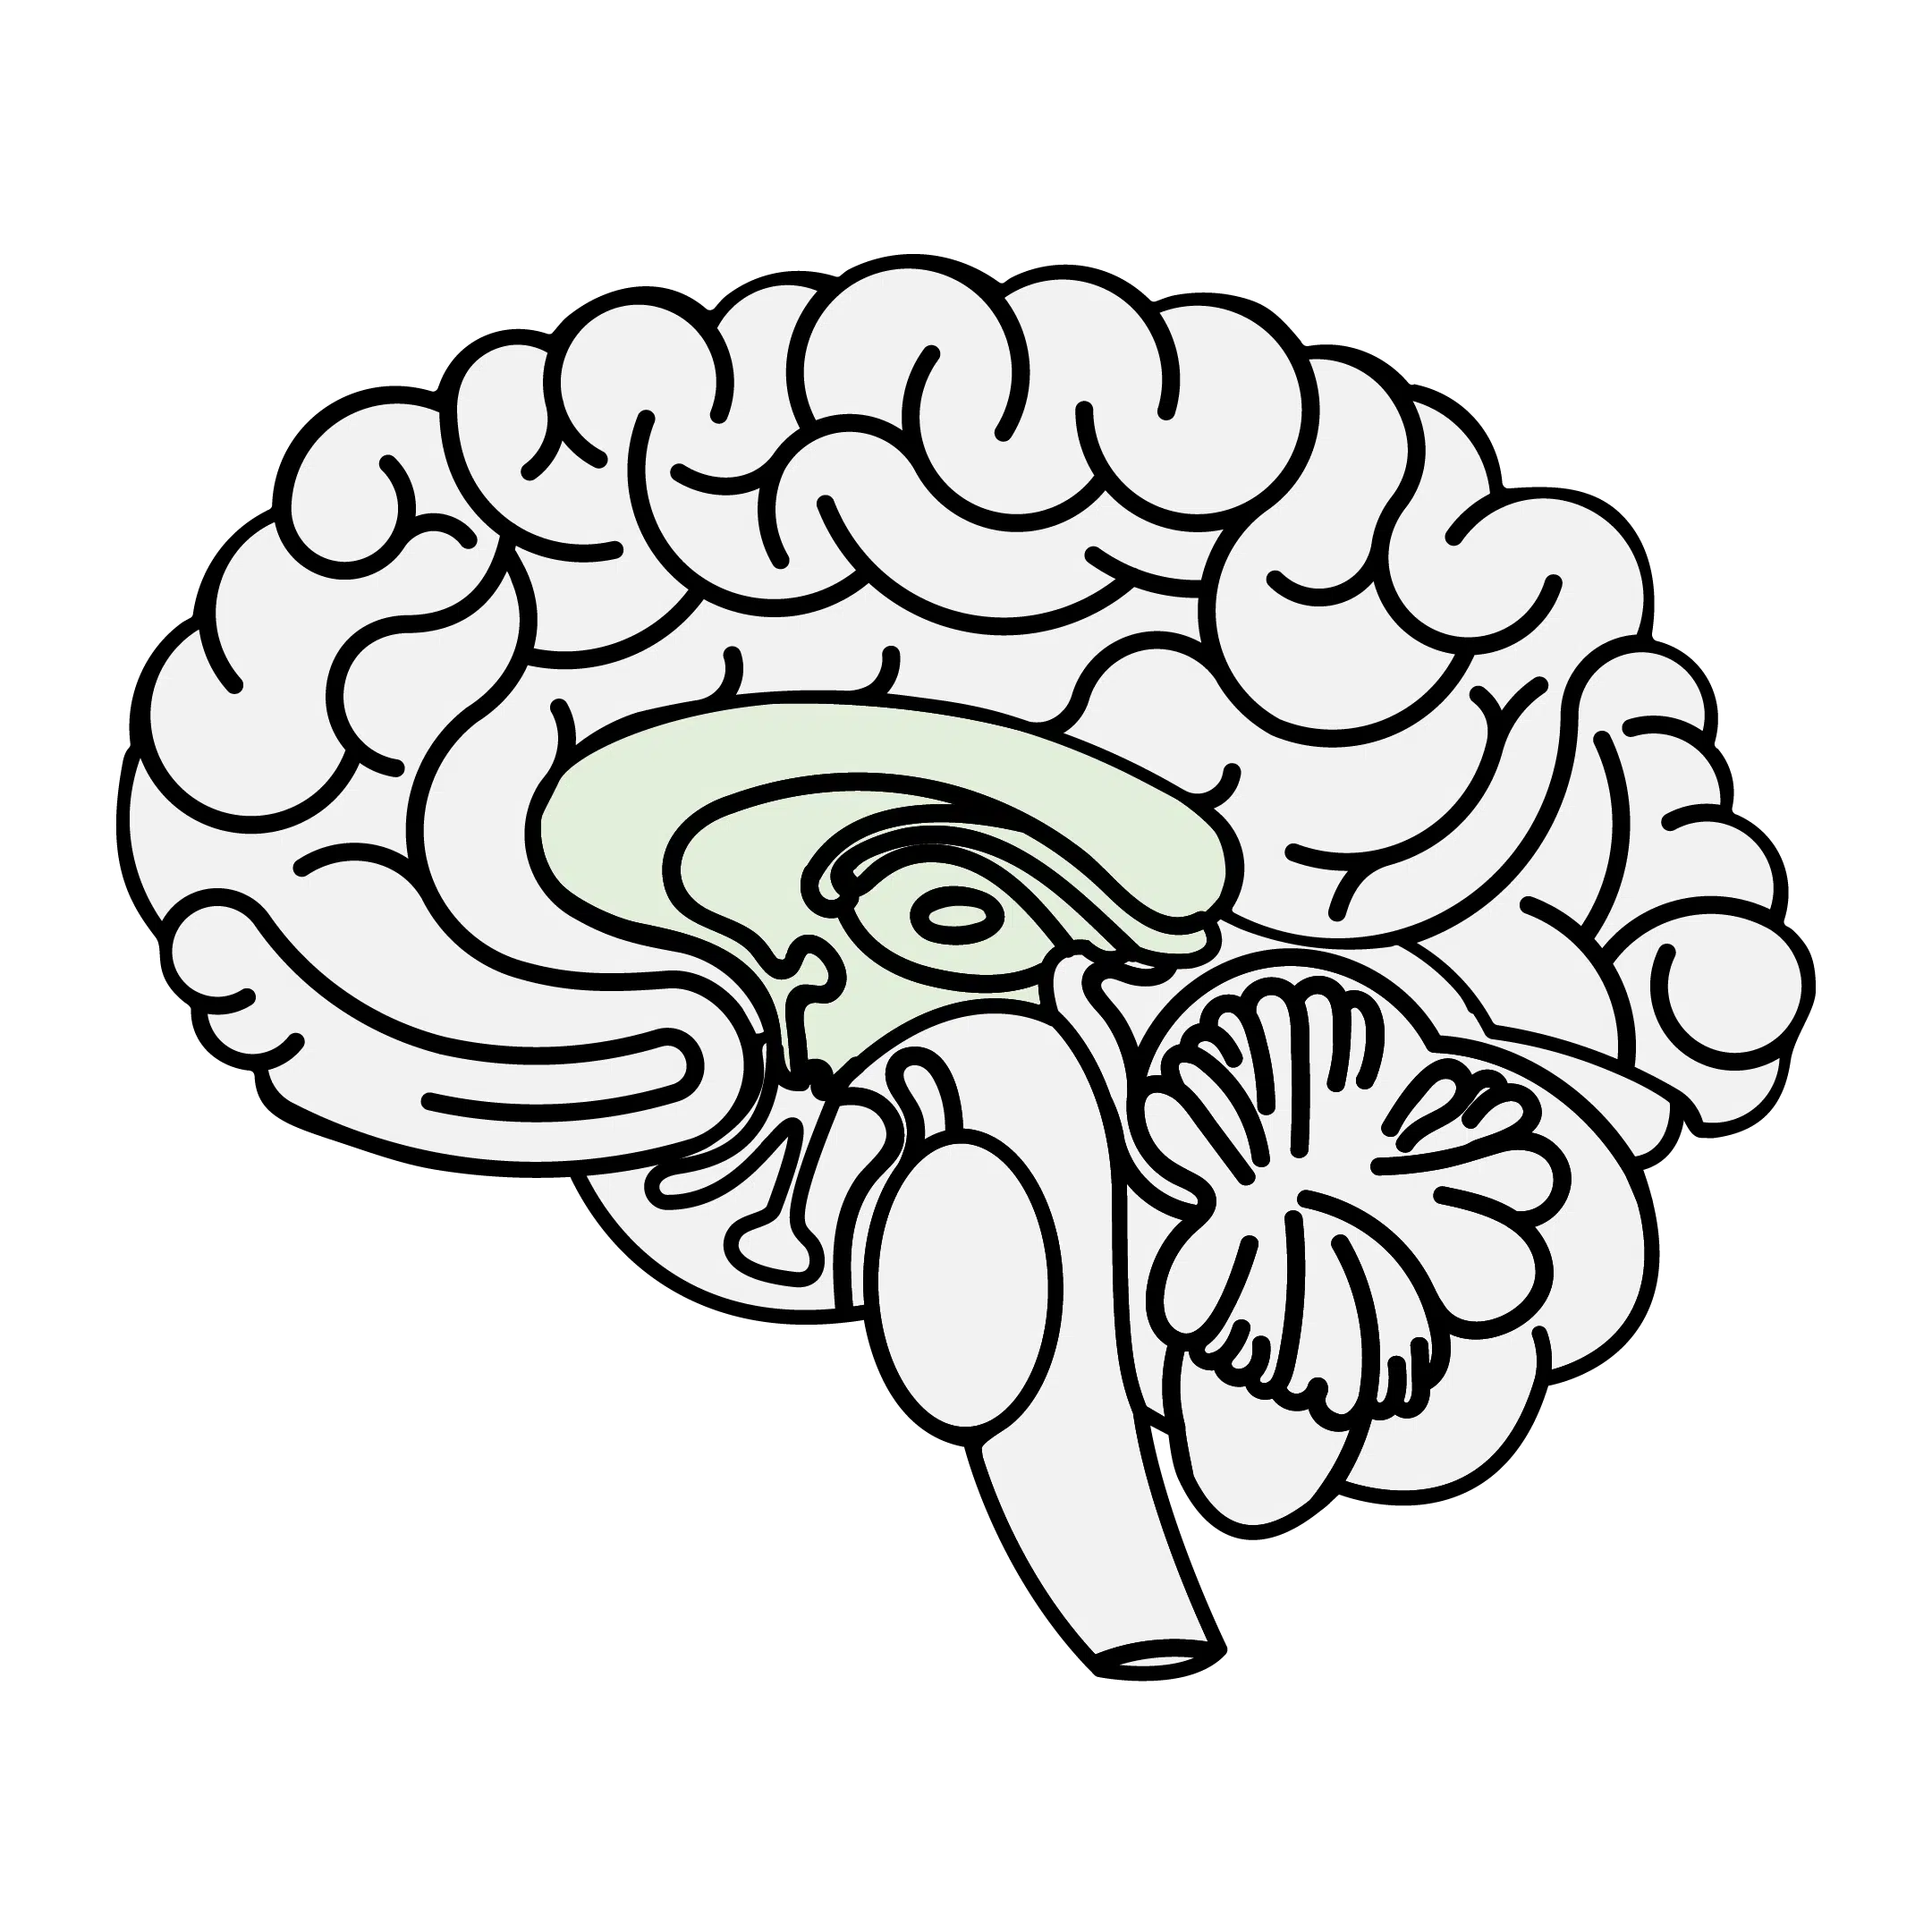 Illustration of the brain highlighting the limbic system